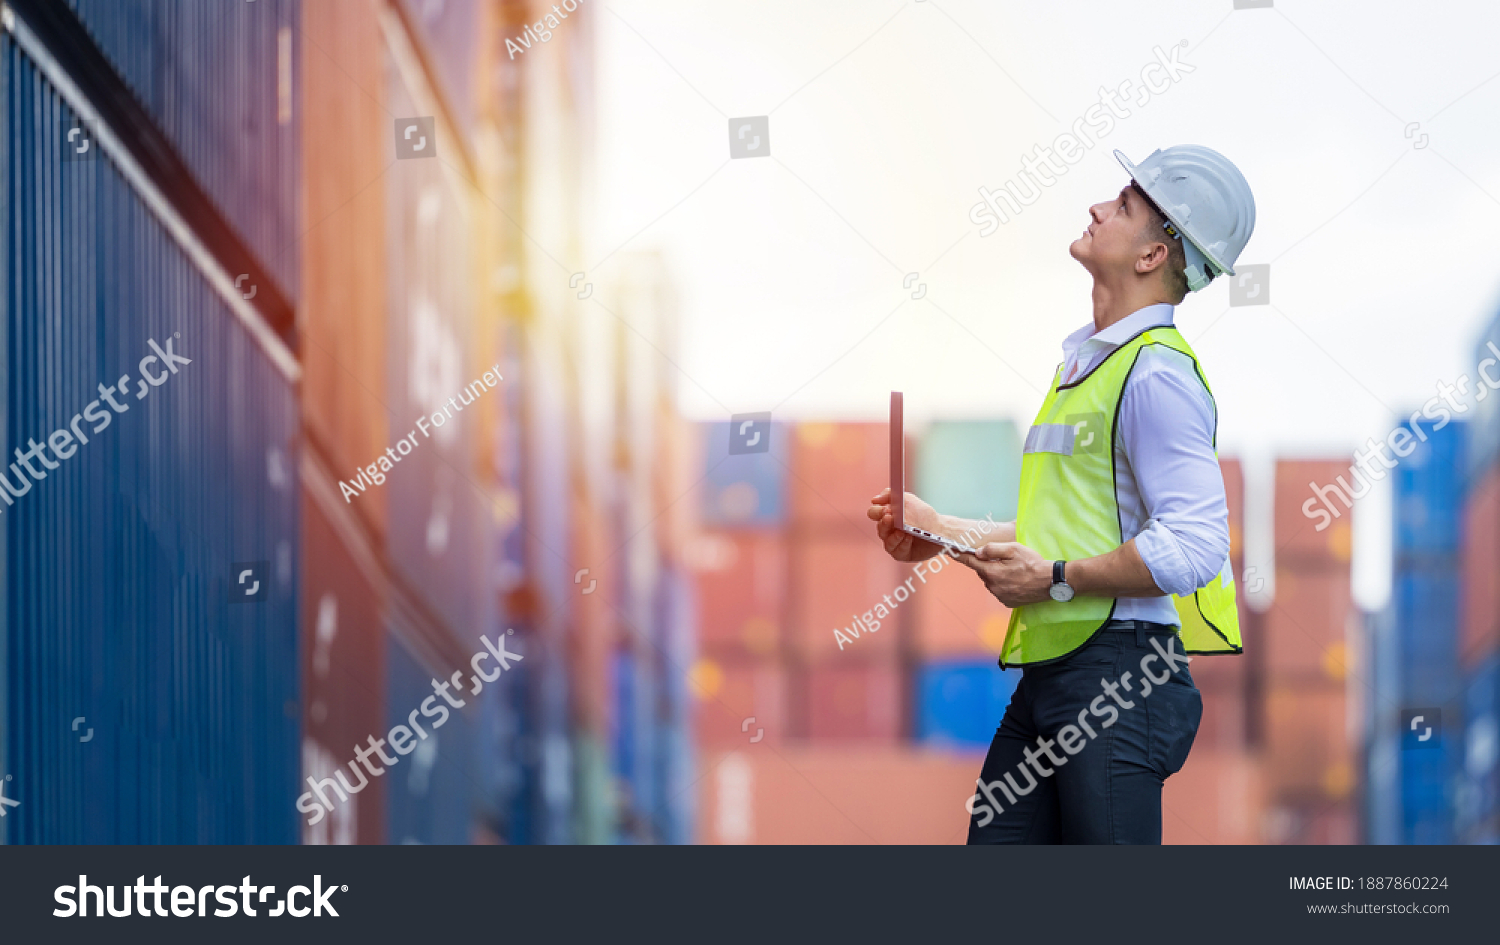 Engineer dock worker wear safety uniform check control loading freight cargo container use computer laptop at commercial dock warehouse, Global business logistic transportation cargo freight shipping. #1887860224